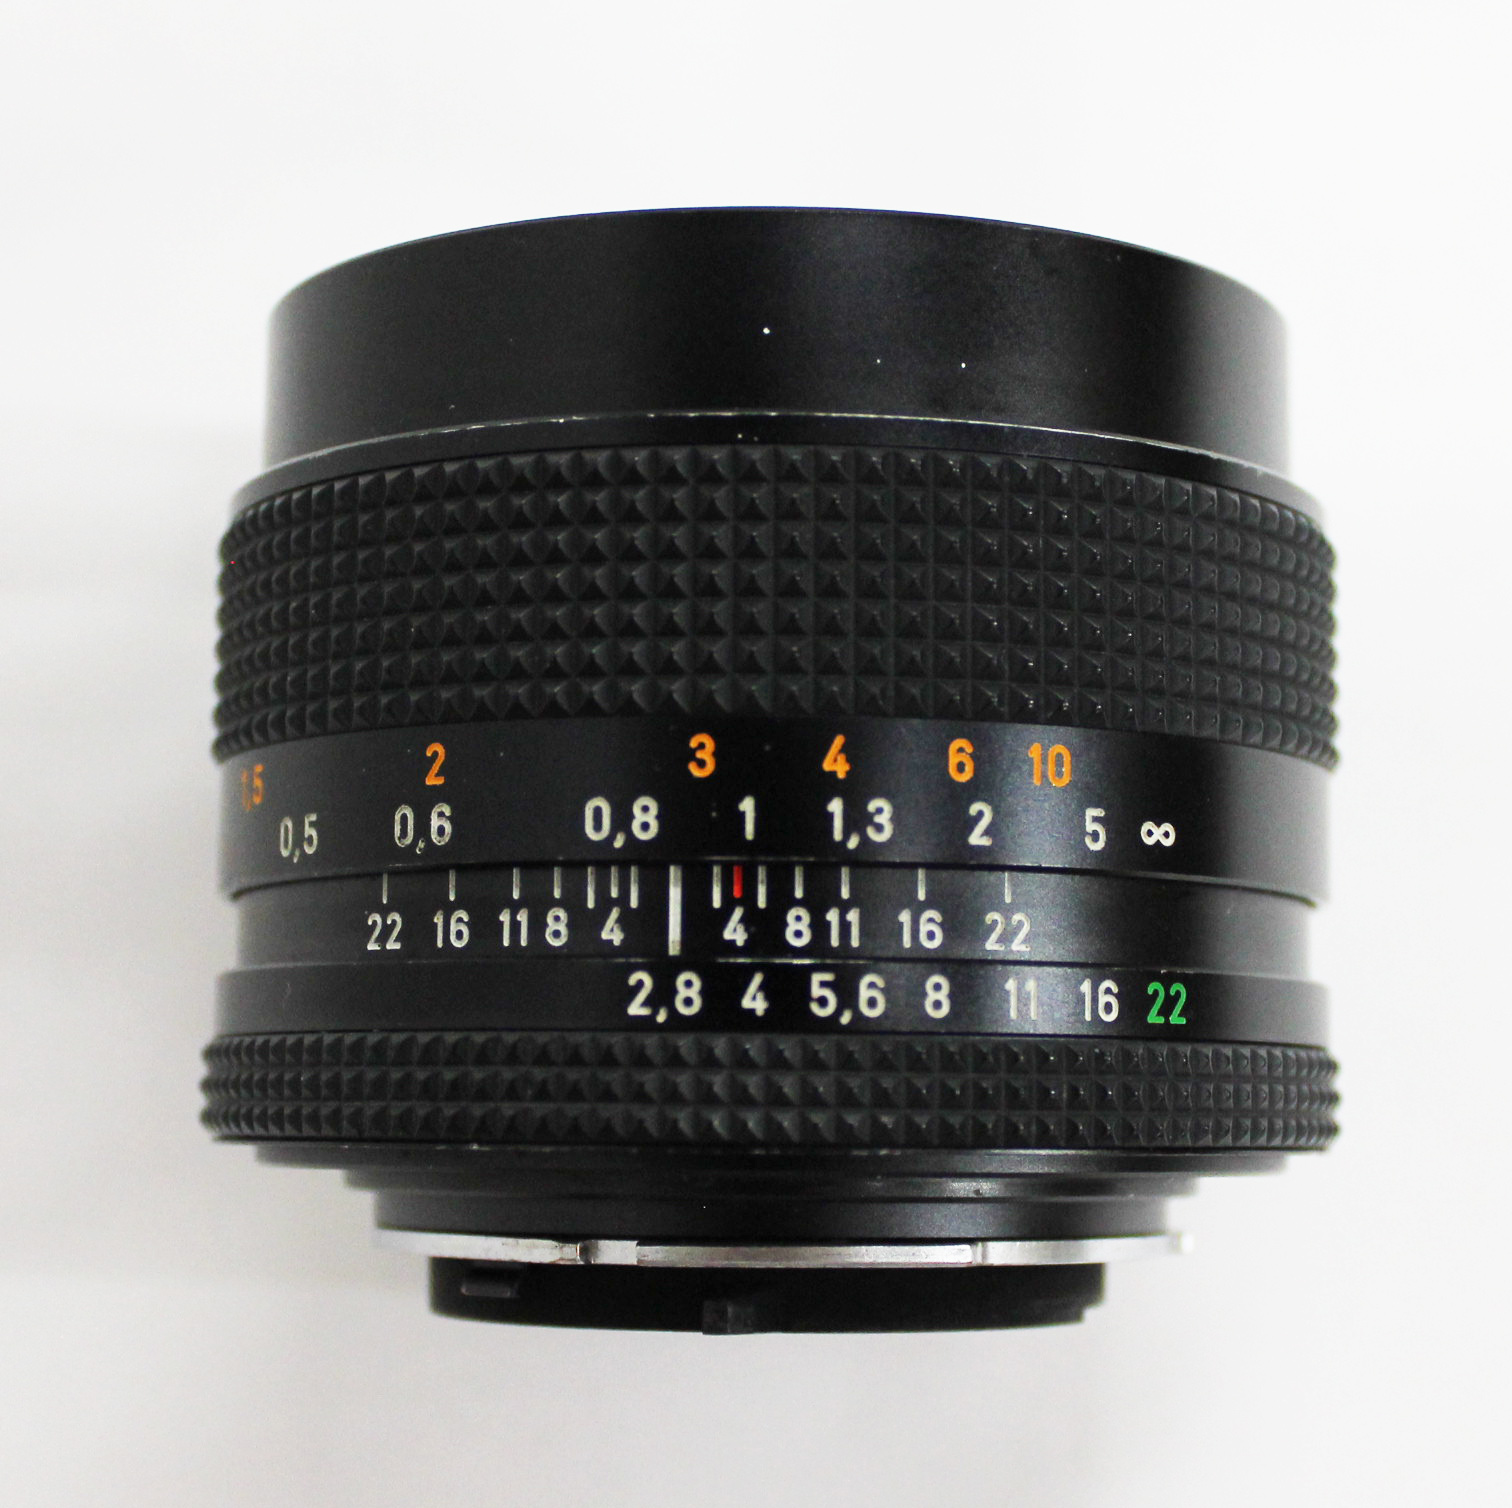  Contax Carl Zeiss Distagon T* 35mm F2.8 MMJ MF Lens from Japan Photo 3